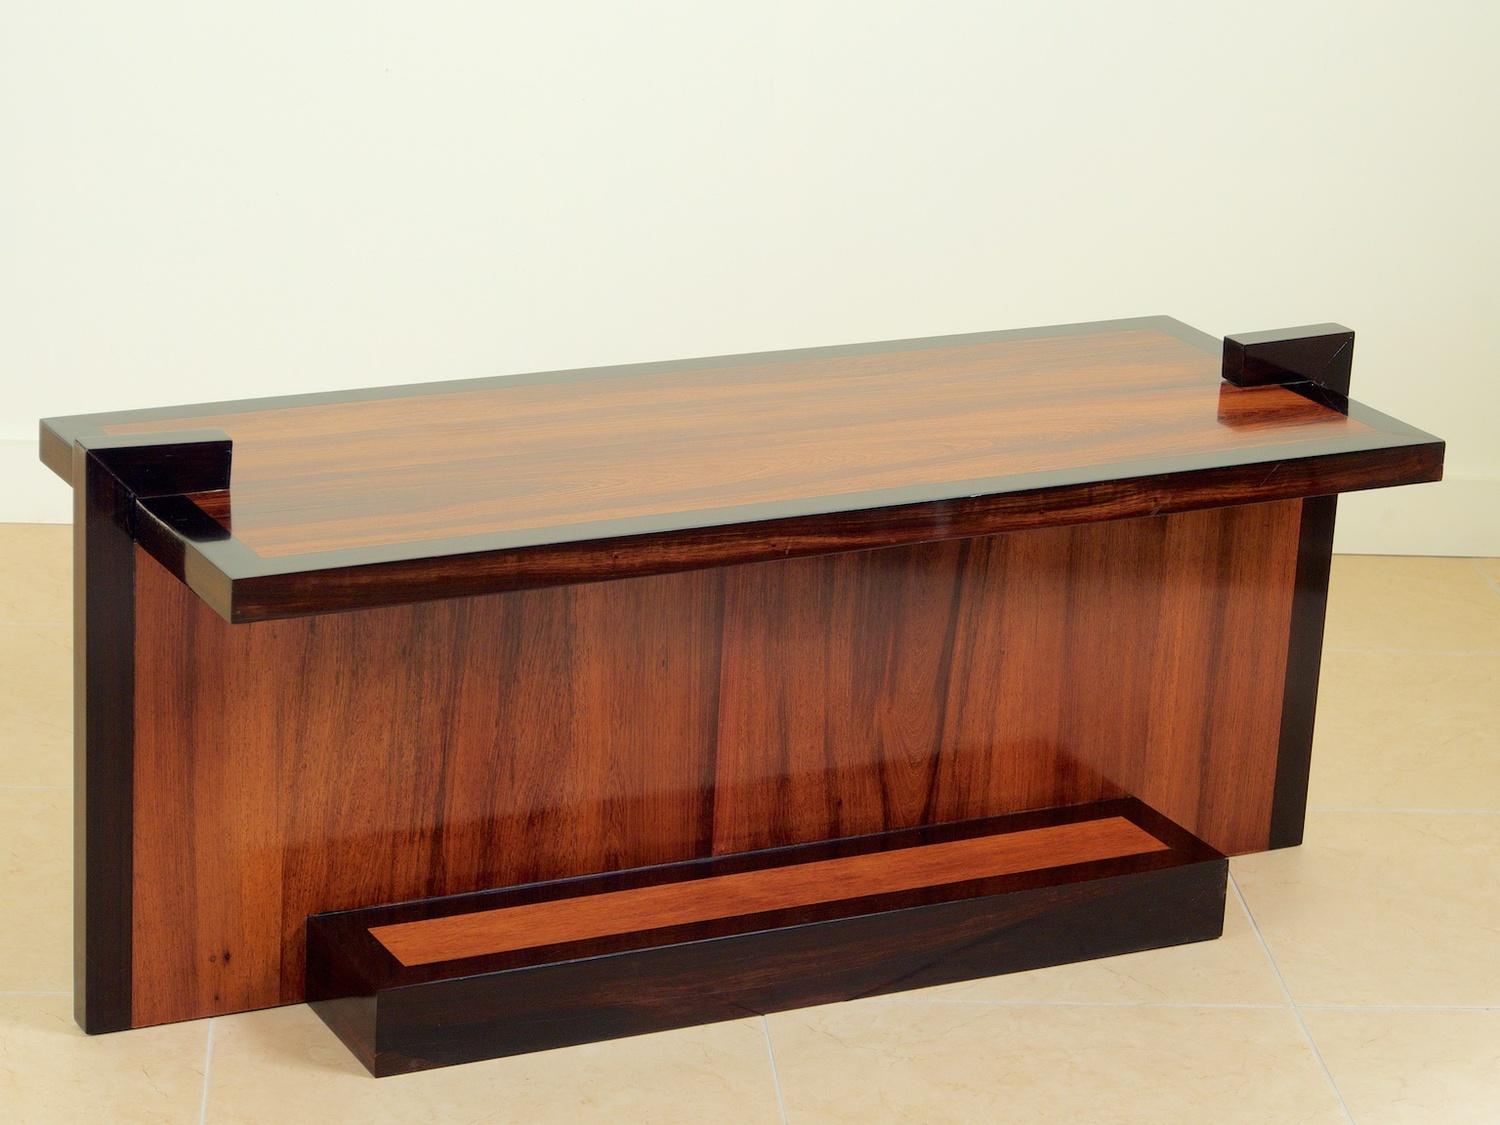 French Modernist Art Deco coffee table by Jean Royere, 1937, in black rosewood and satinwood, made by Goufe. Documented. 47